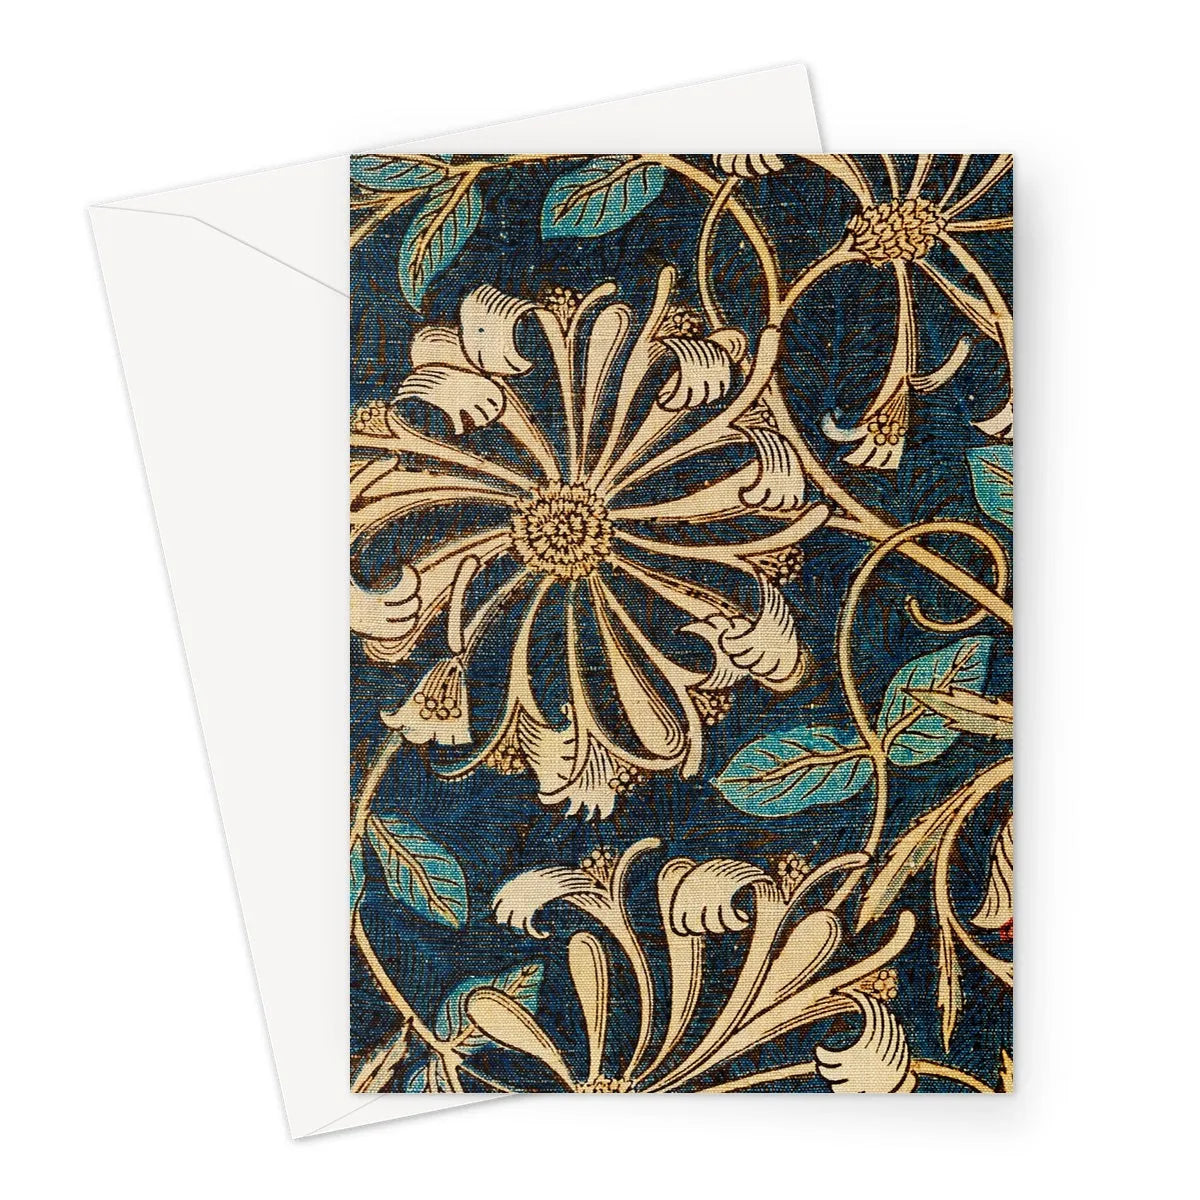 Honeysuckle 3 - William Morris Floral Art Greeting Card - A5 Portrait / 1 Card - Greeting & Note Cards - Aesthetic Art